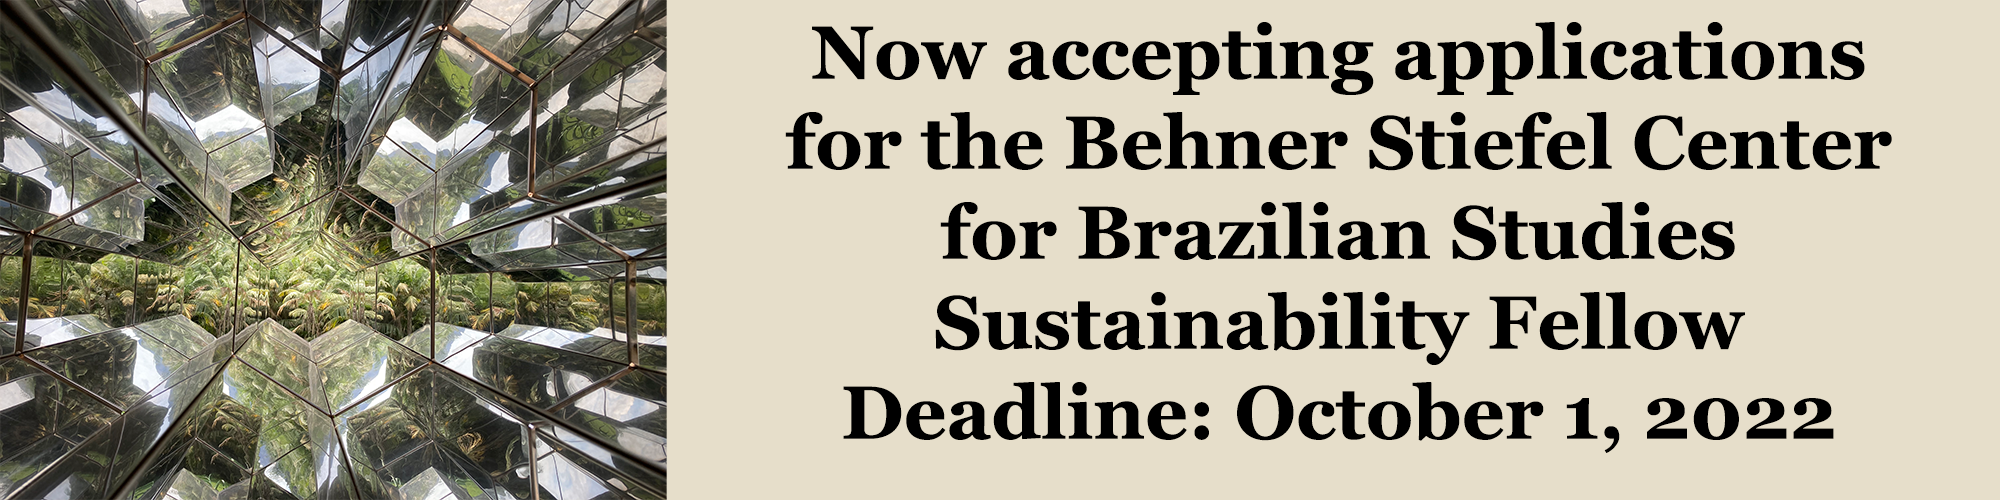 Now accepting applications for Brazilian Studies Sustainability Fellow. Apply by October 1, 2022.